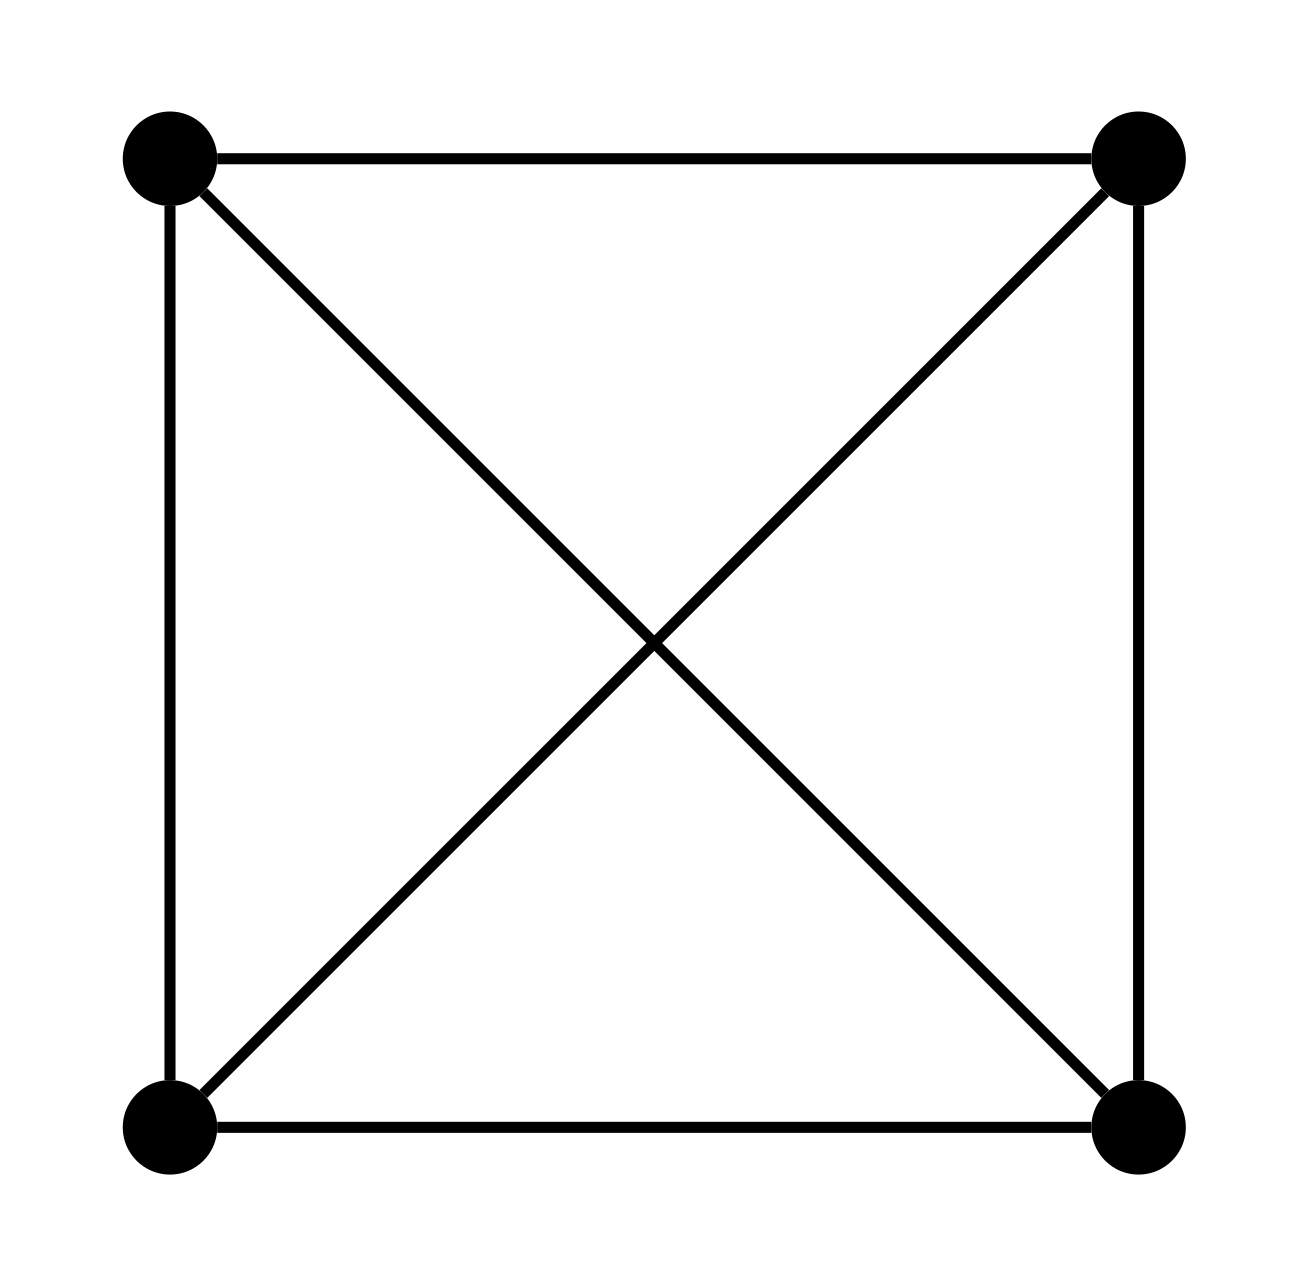 complete graph on four vertices